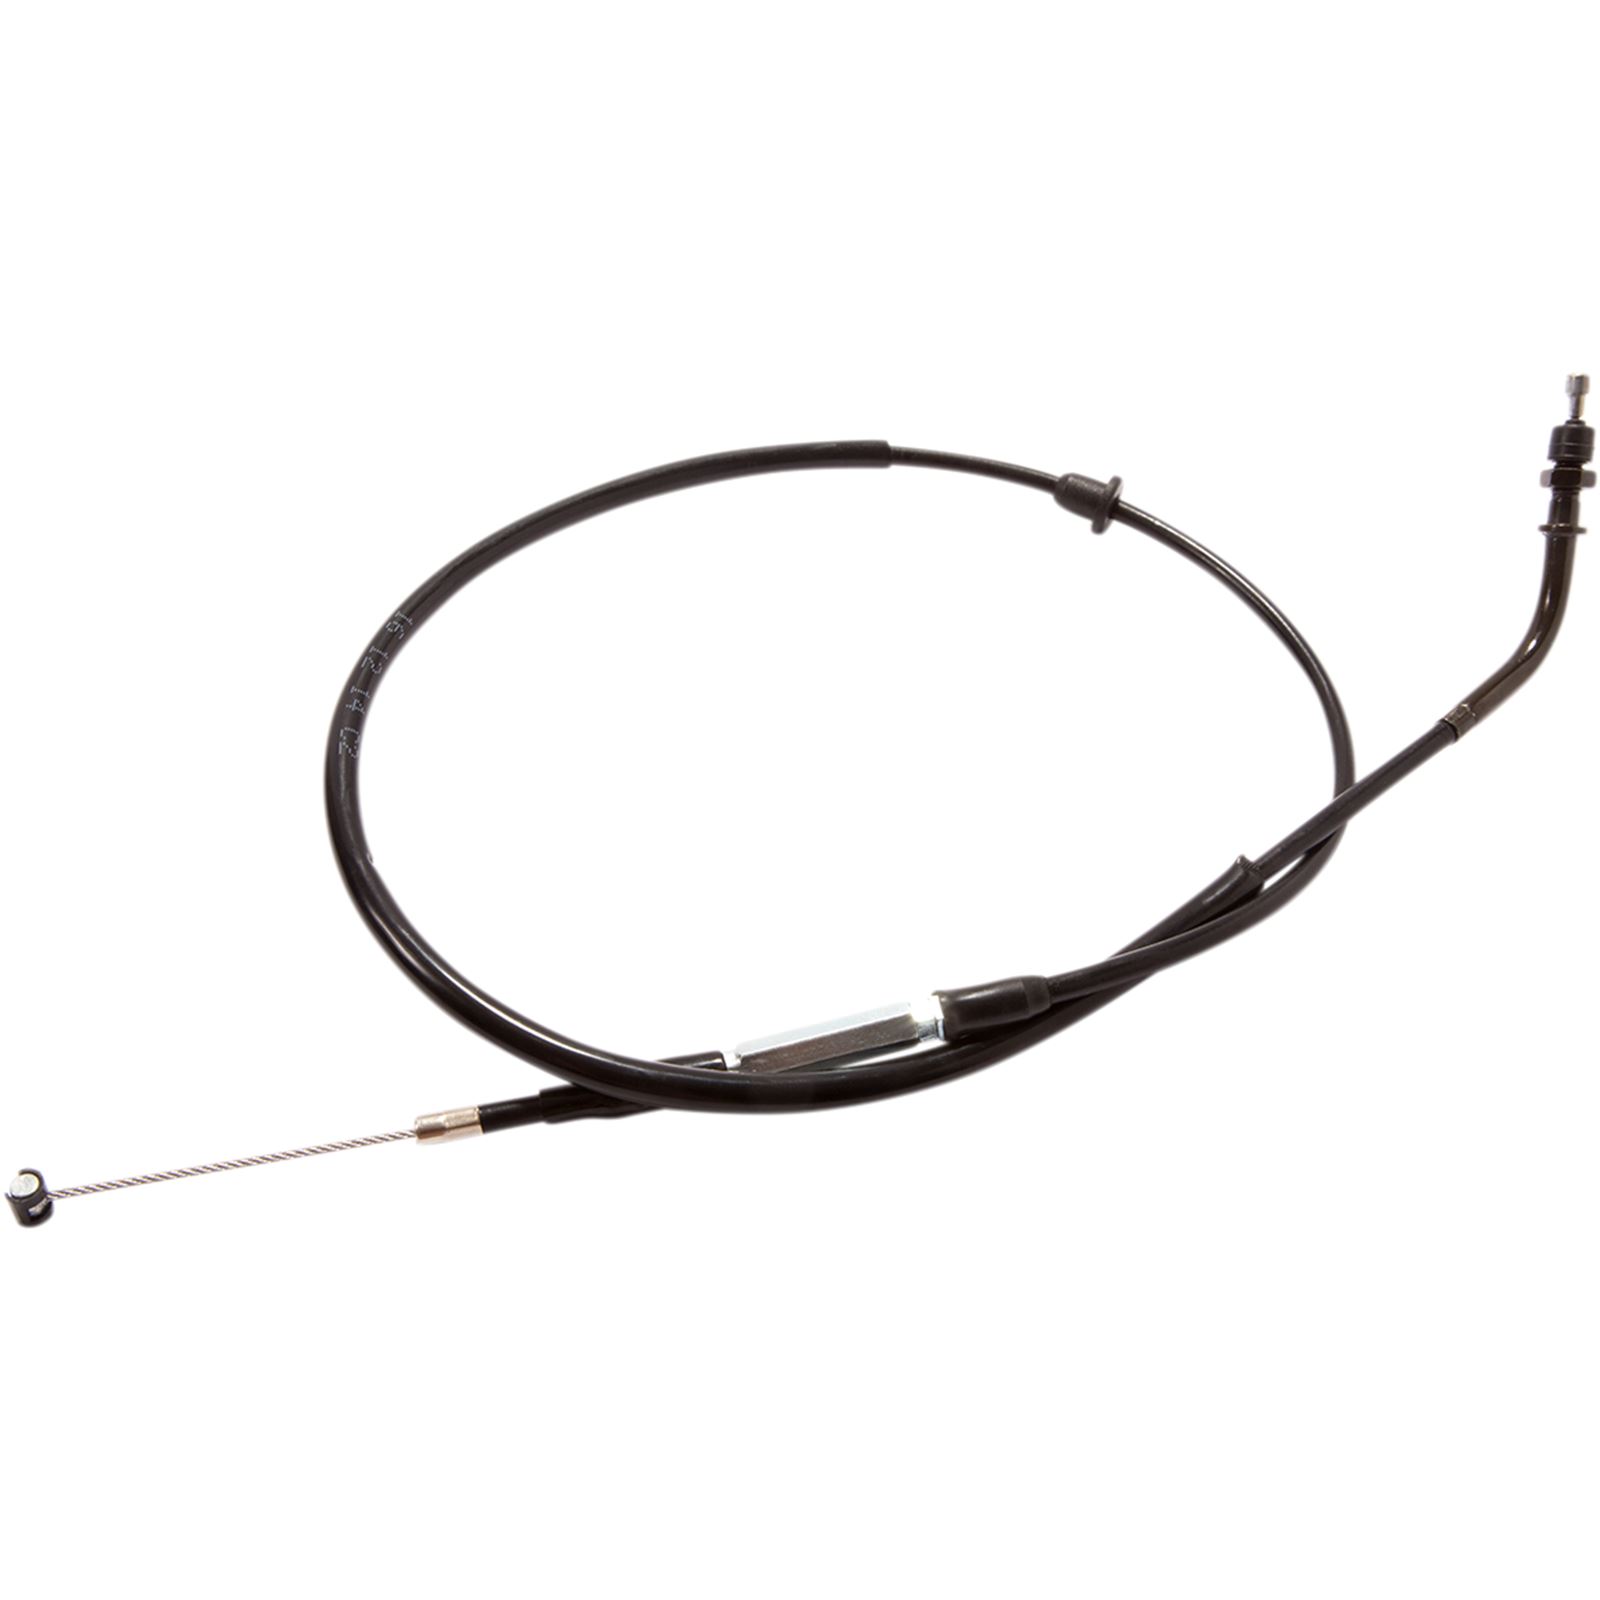 Motion Pro Mp Cable Clu Hon Crf450R/Rx